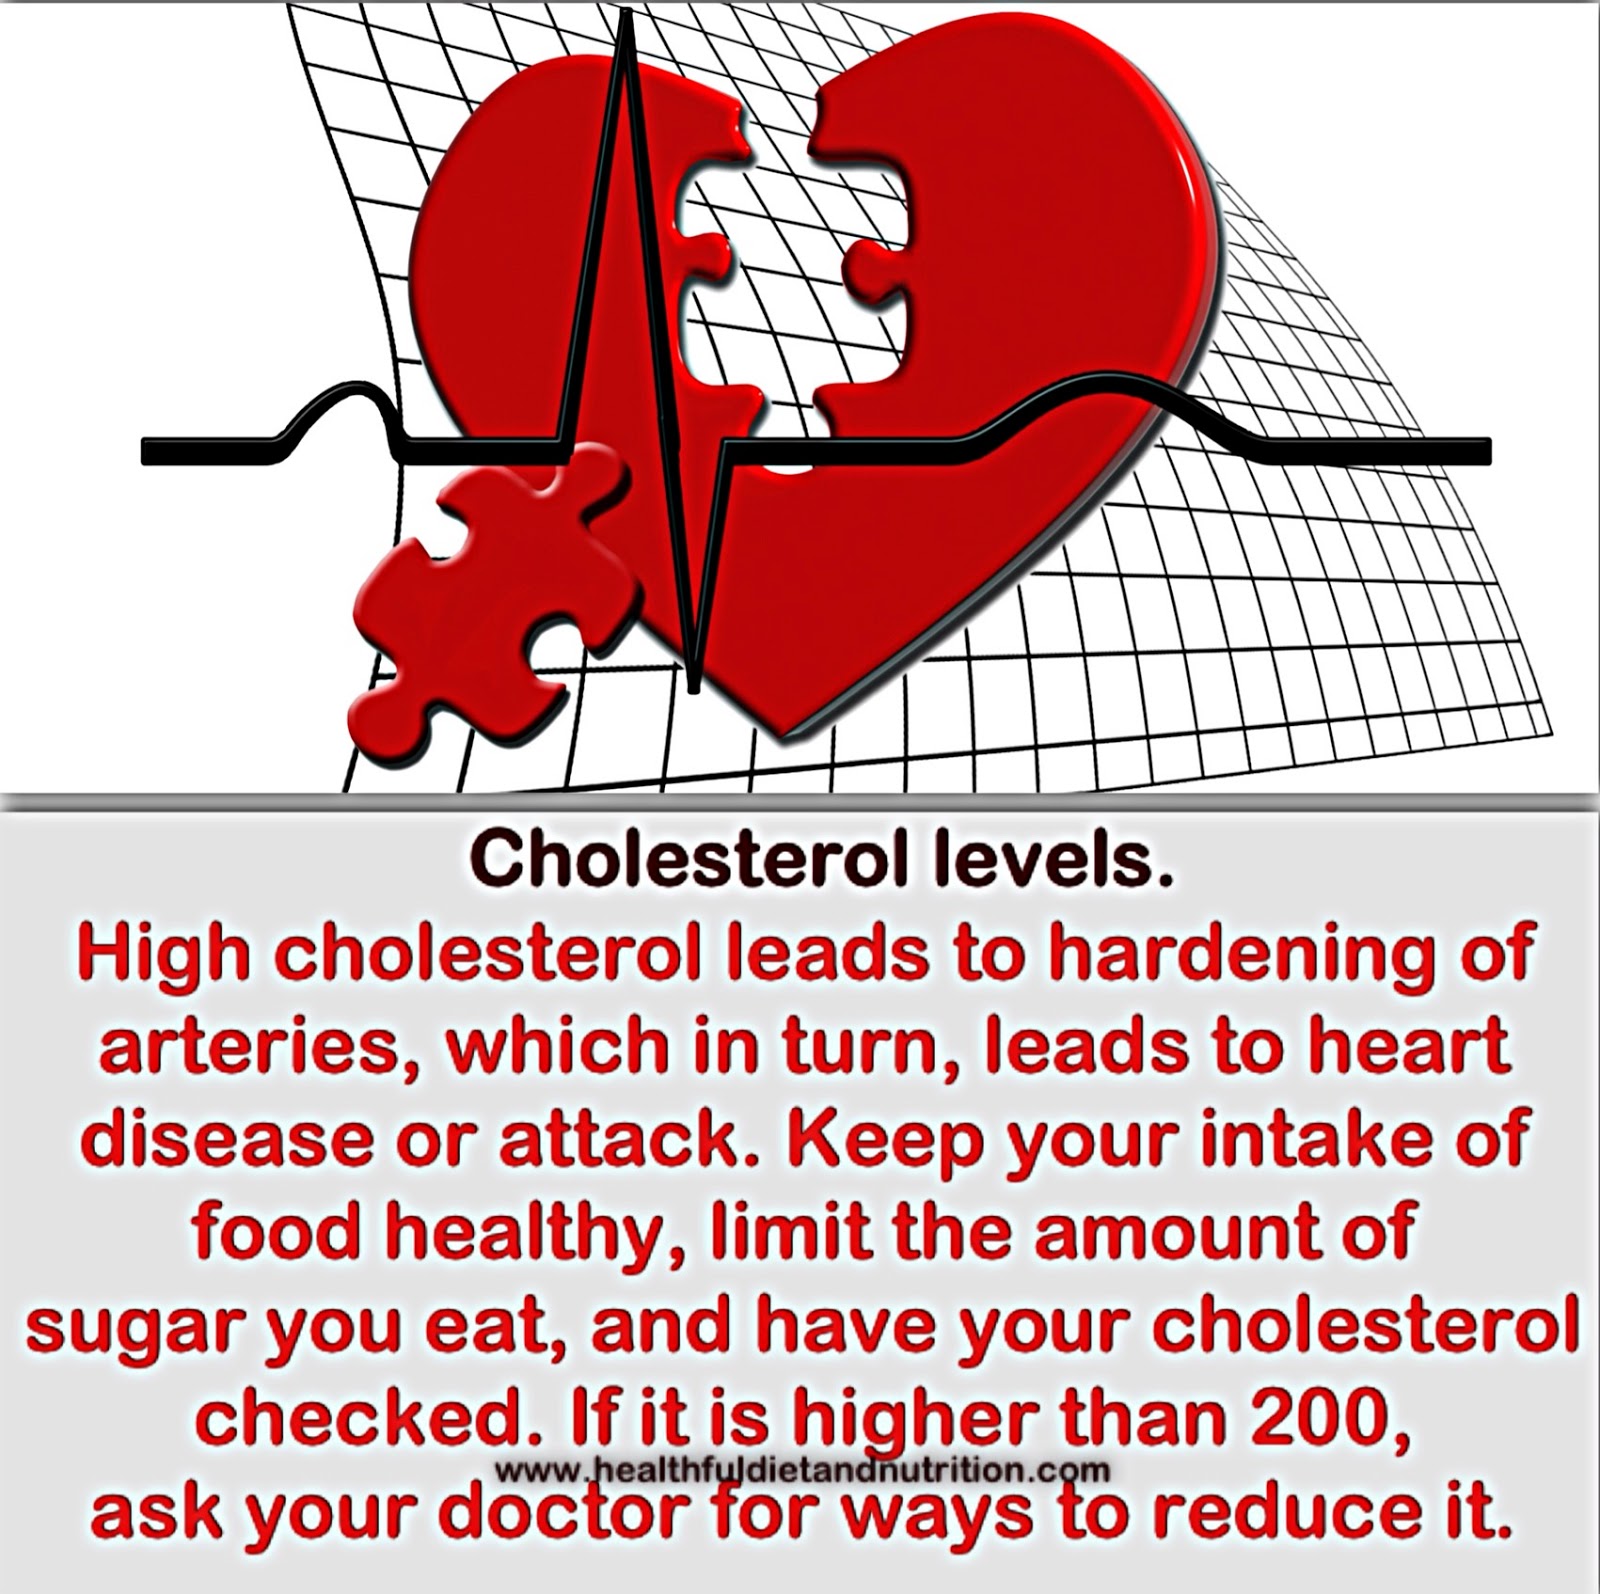 Maintain A Healthy Cholesterol Level